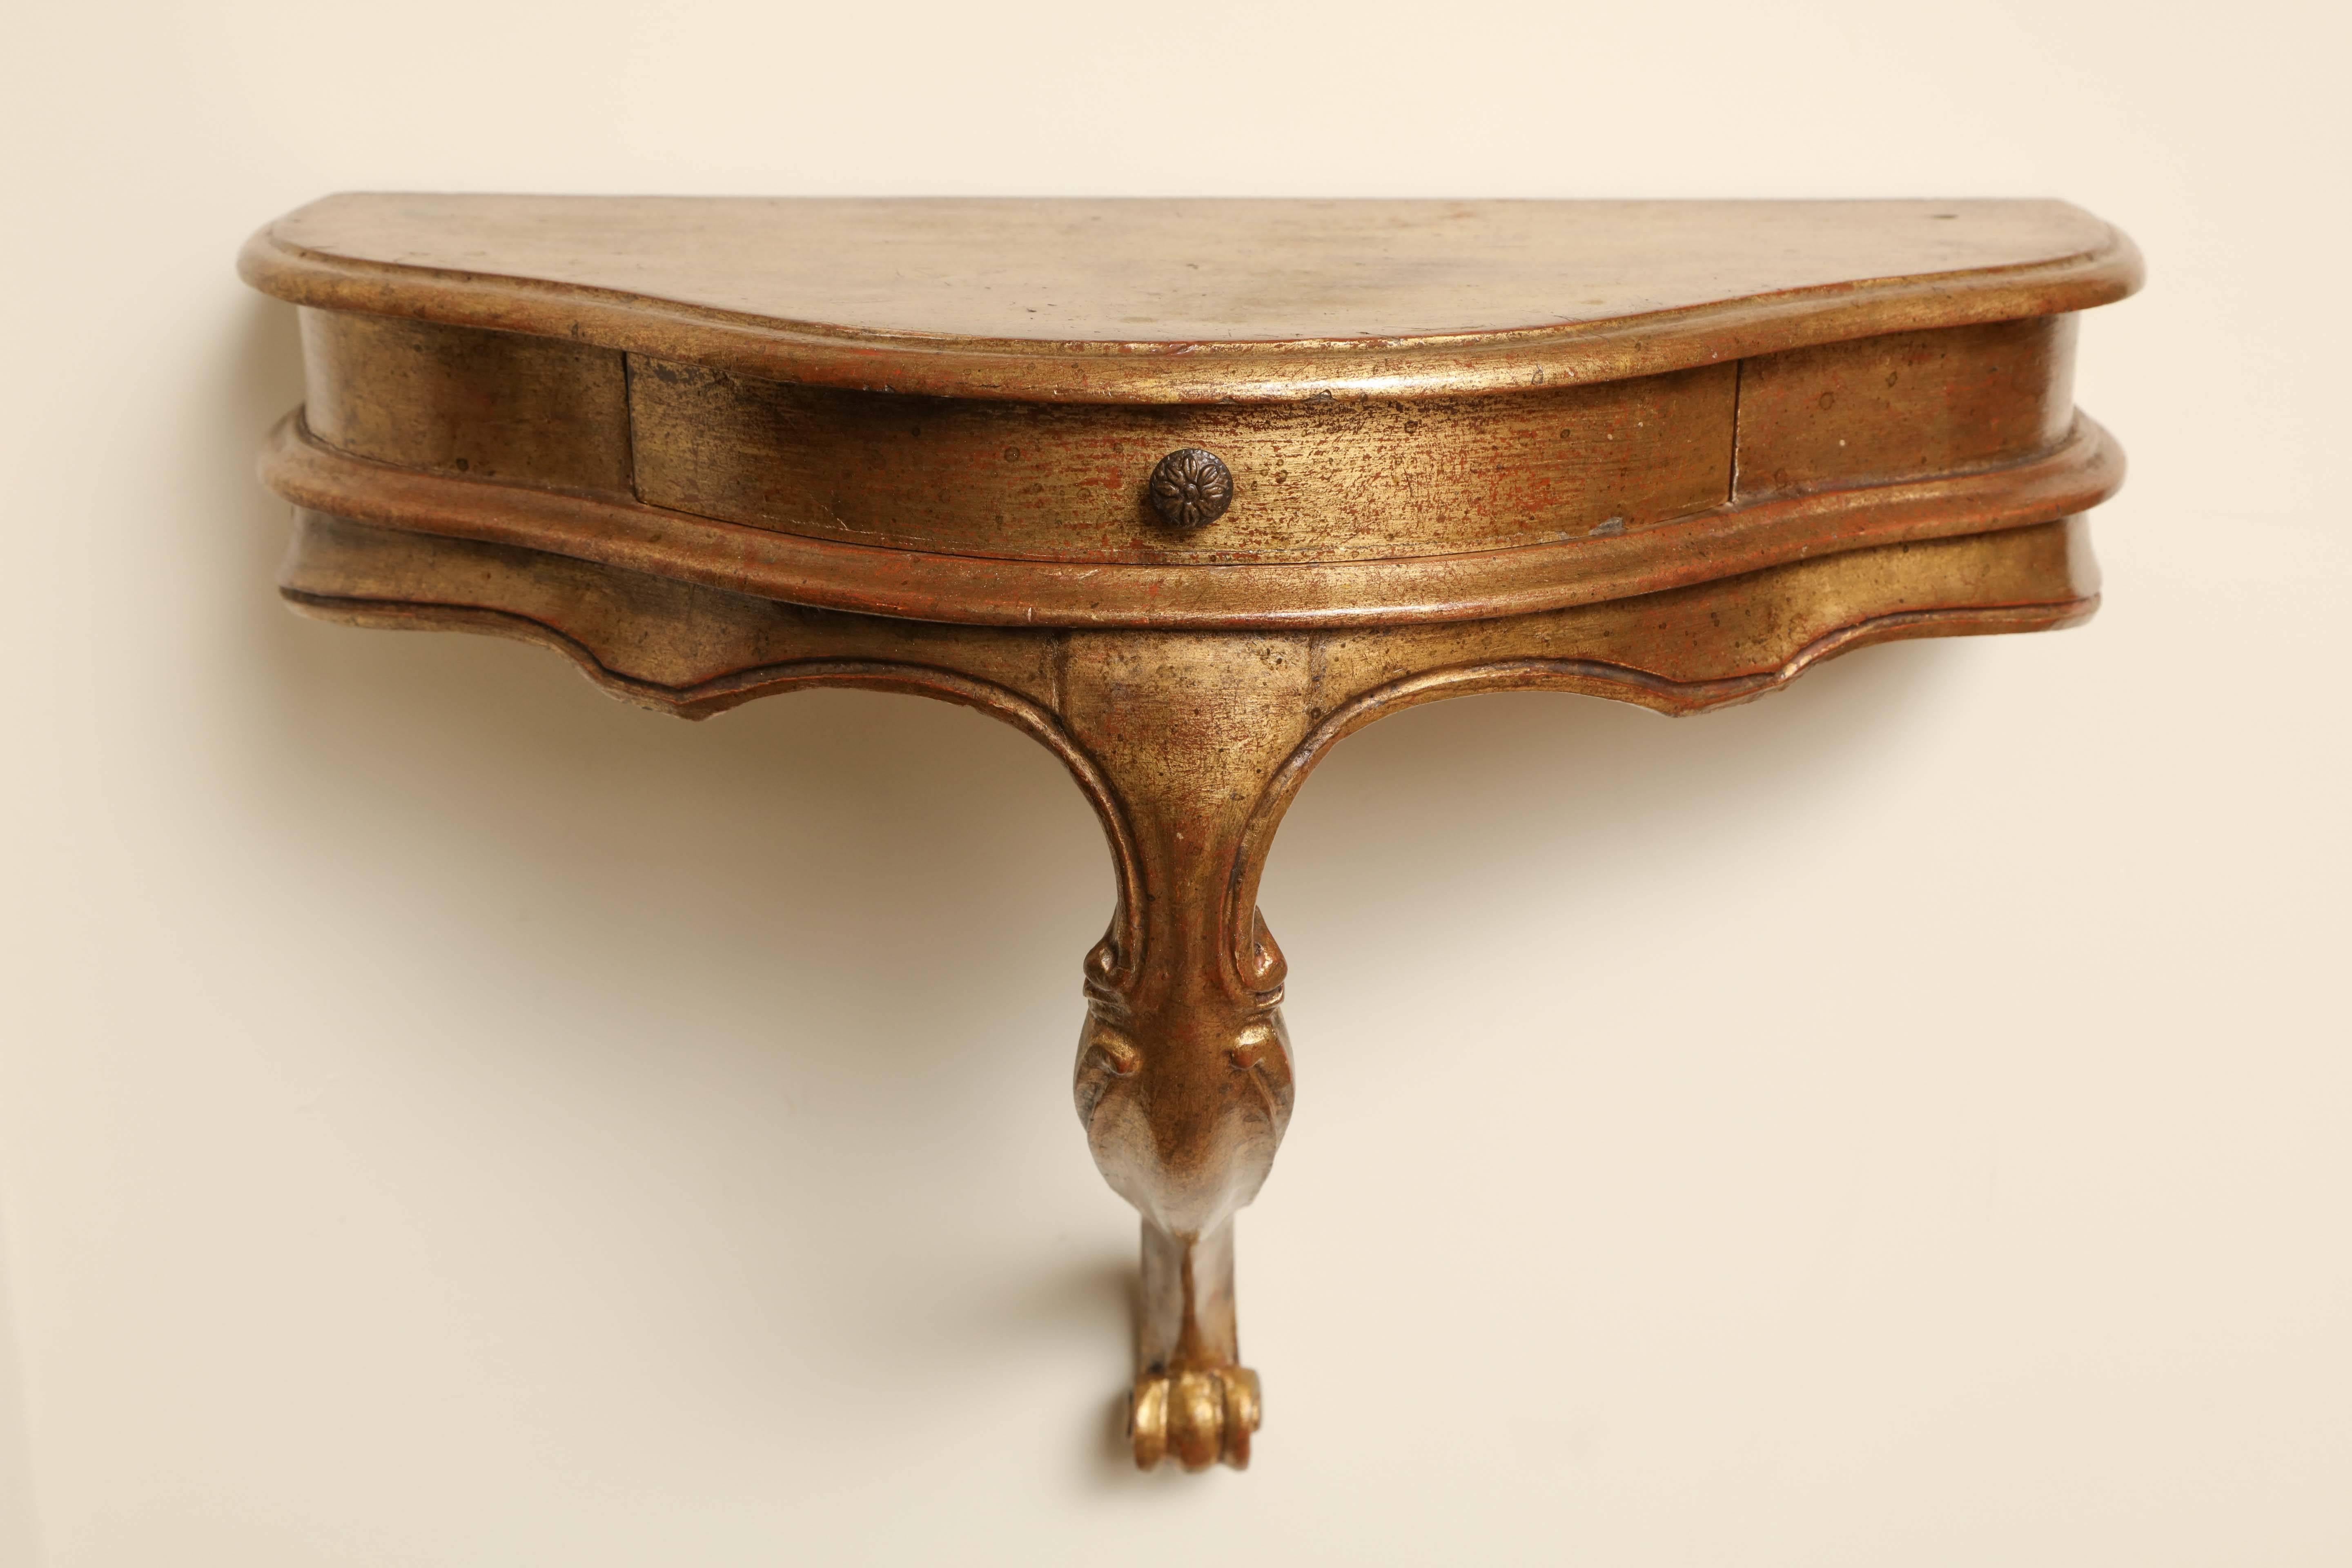 Italianate wall-mounted console with gilded surface, circa 1940.